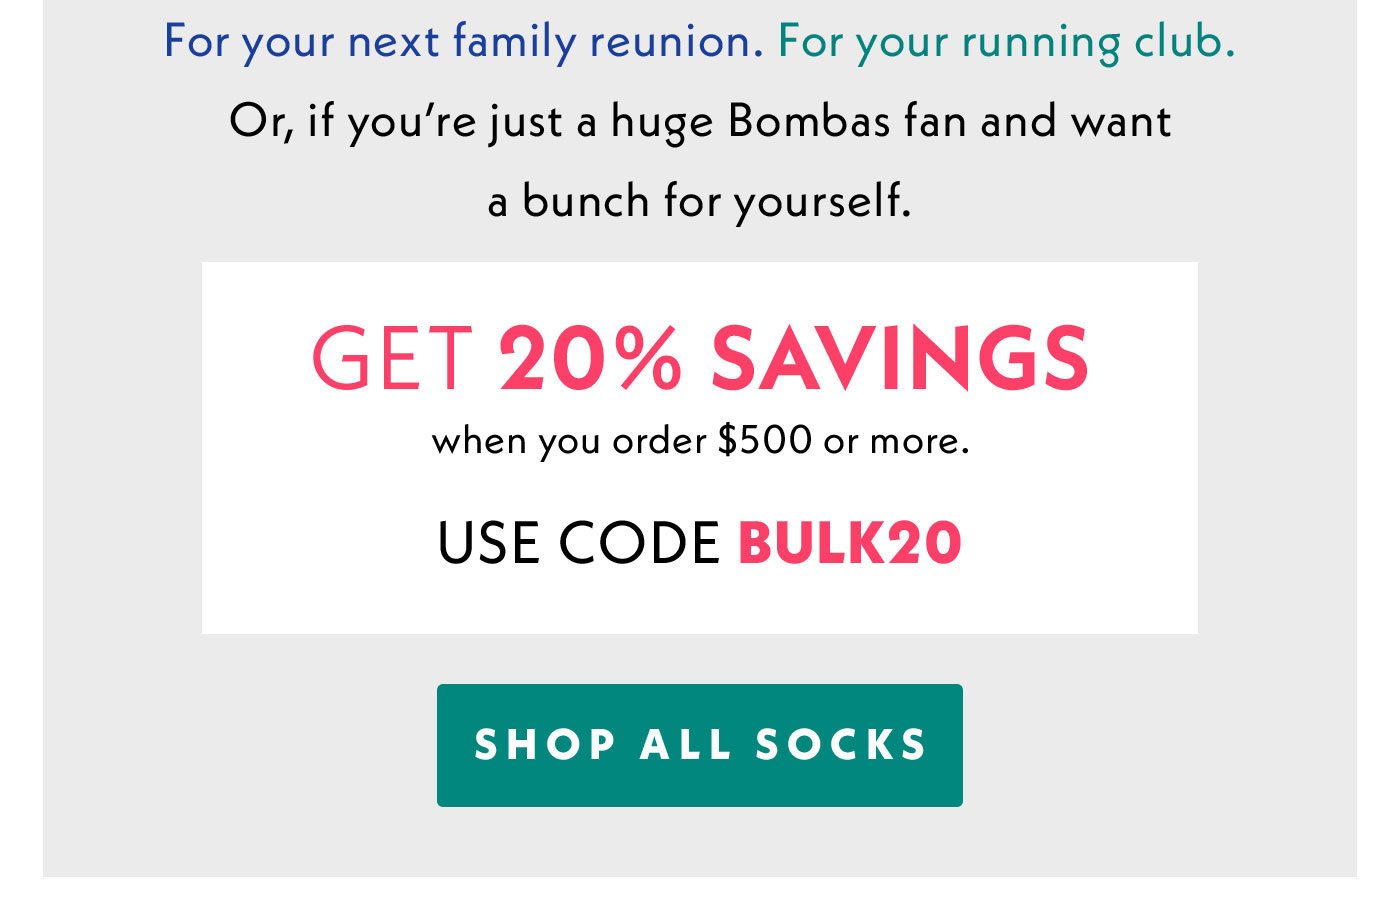 For your next family reunion. For your running club. Or, if you're just a huge Bombas fan and want a bunch for yourself. Get 20% Savings when you order $500 or more. Use code BULK20. Shop All Socks